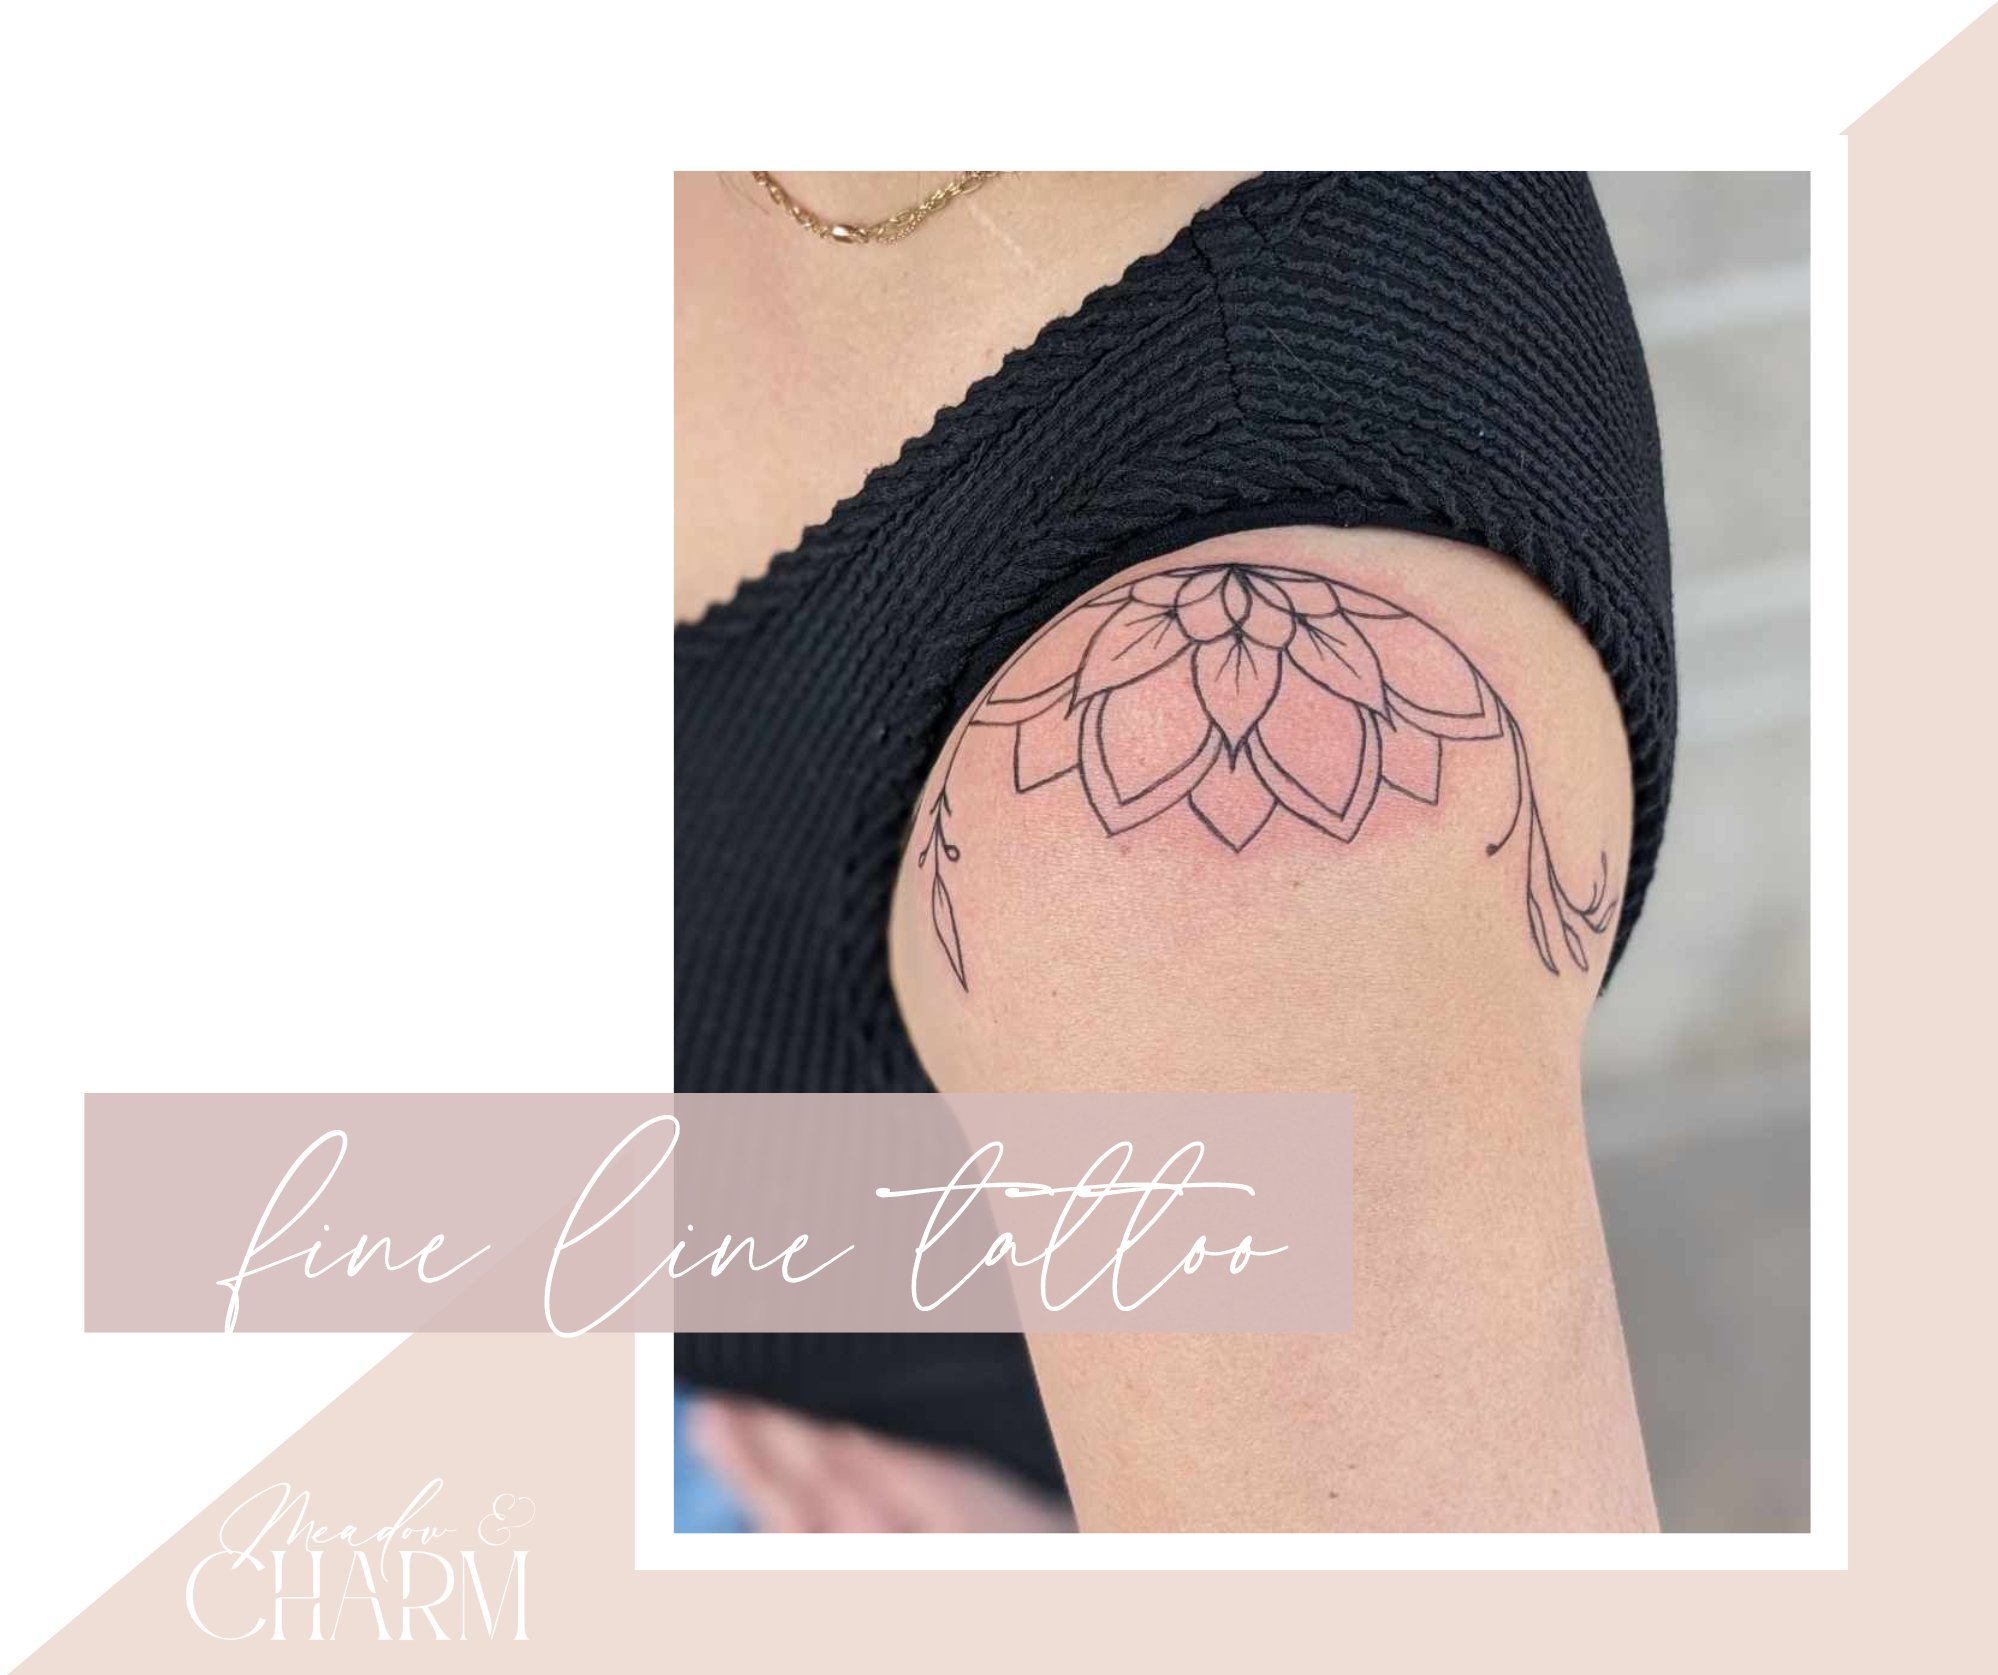 look at this gorgeous shoulder art
.
book your appointment now at www.meadowandcharm.com
.
.
.
Fine line tattoo artist in Council Bluffs and Avoca, IA.